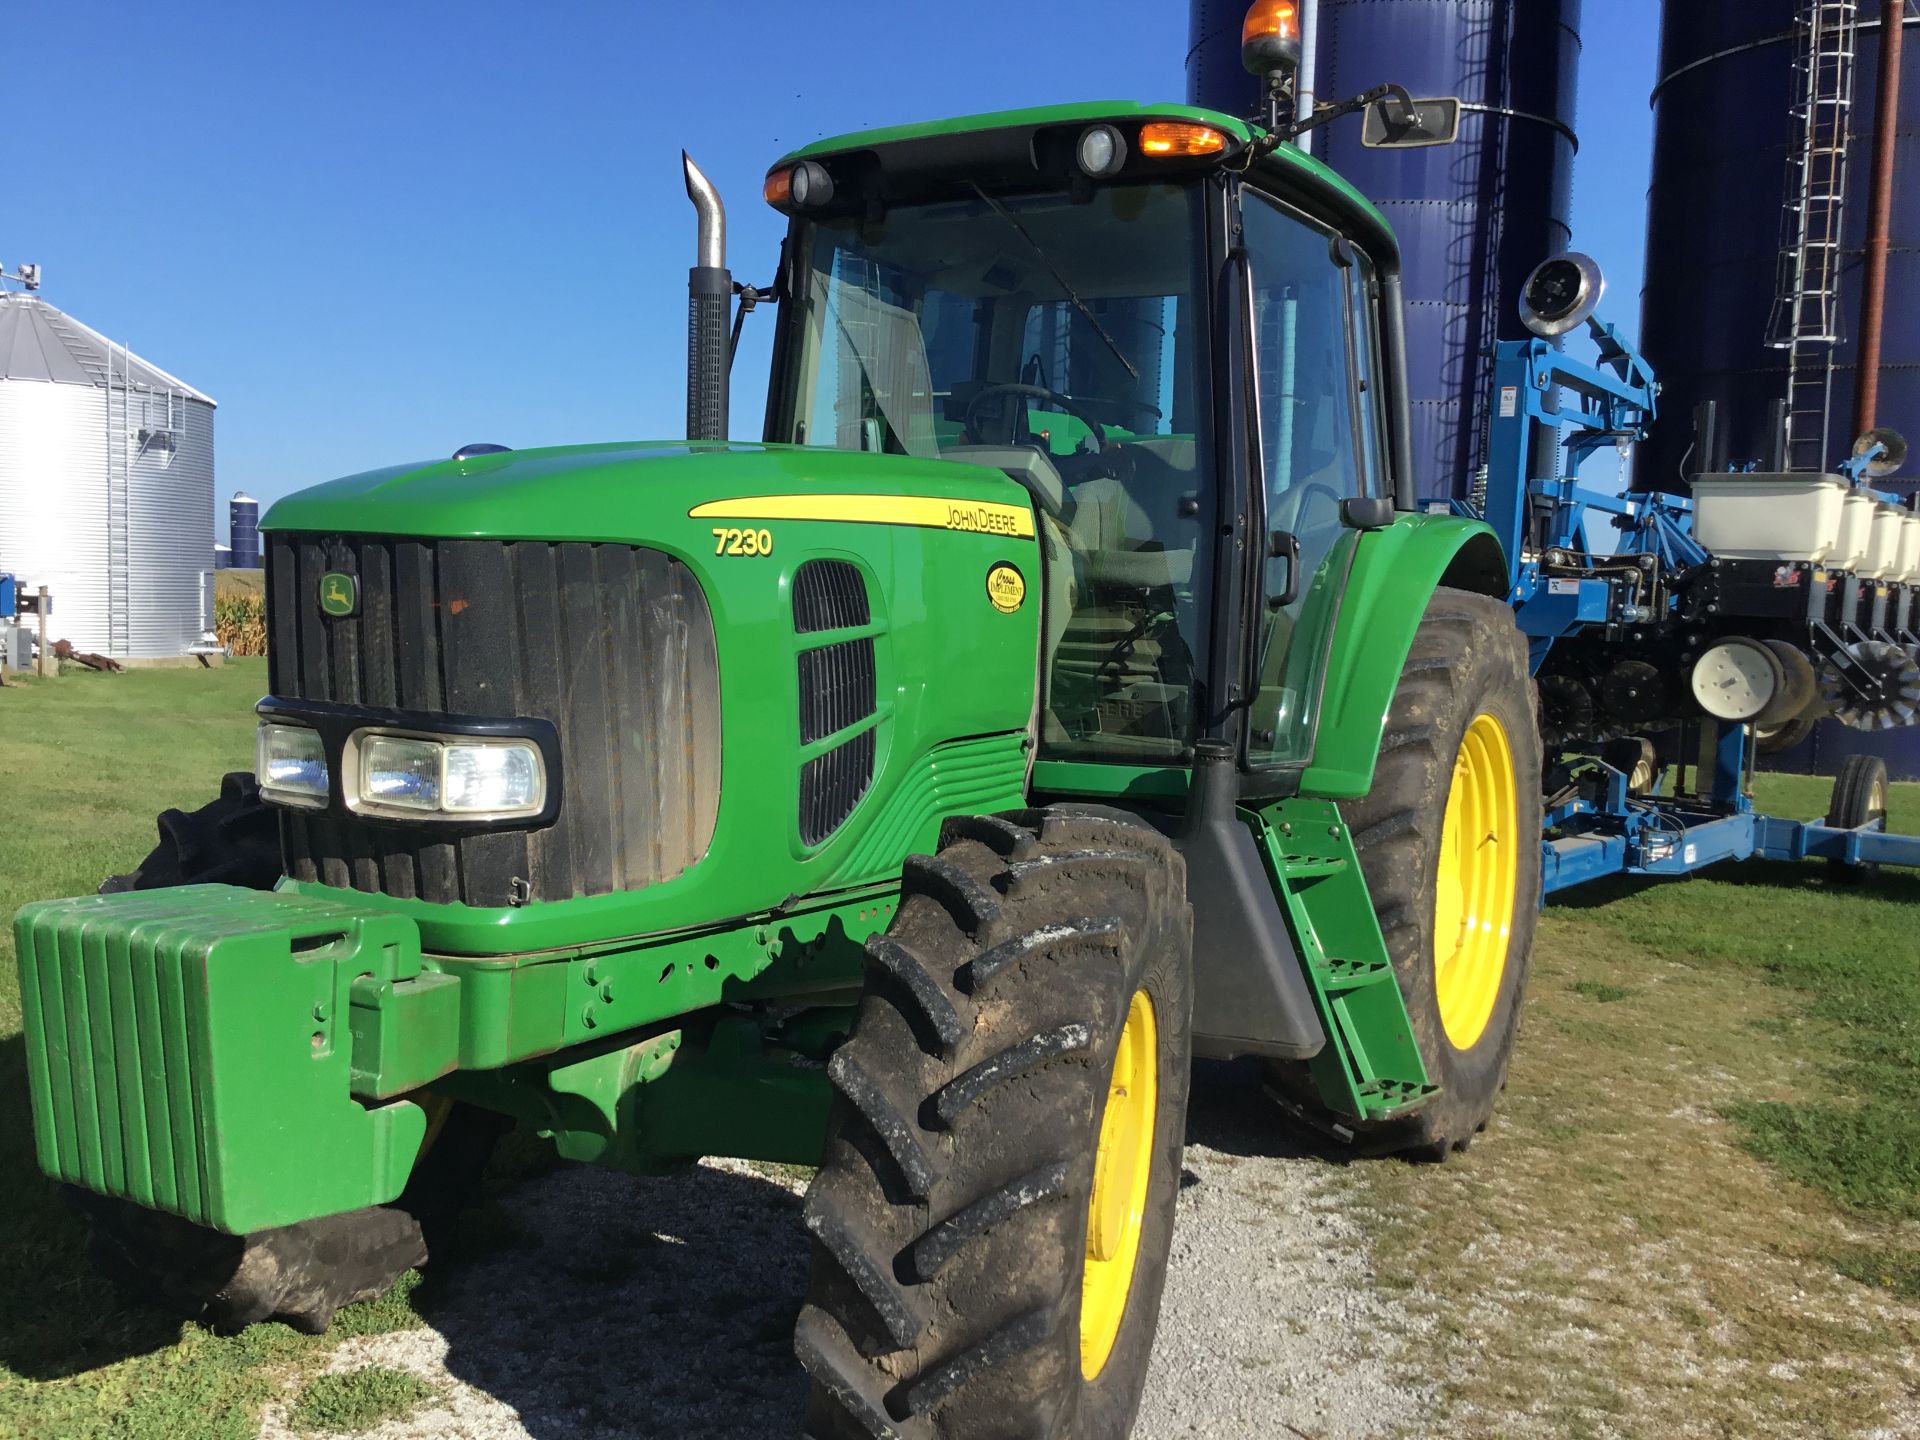 2009 JD 7230 MFWD, 24 Speed Trans, 3 Hyd. Remotes, 1000 PTO, 8 Front Wts., 460/85R38 Rear Tires, - Image 13 of 16